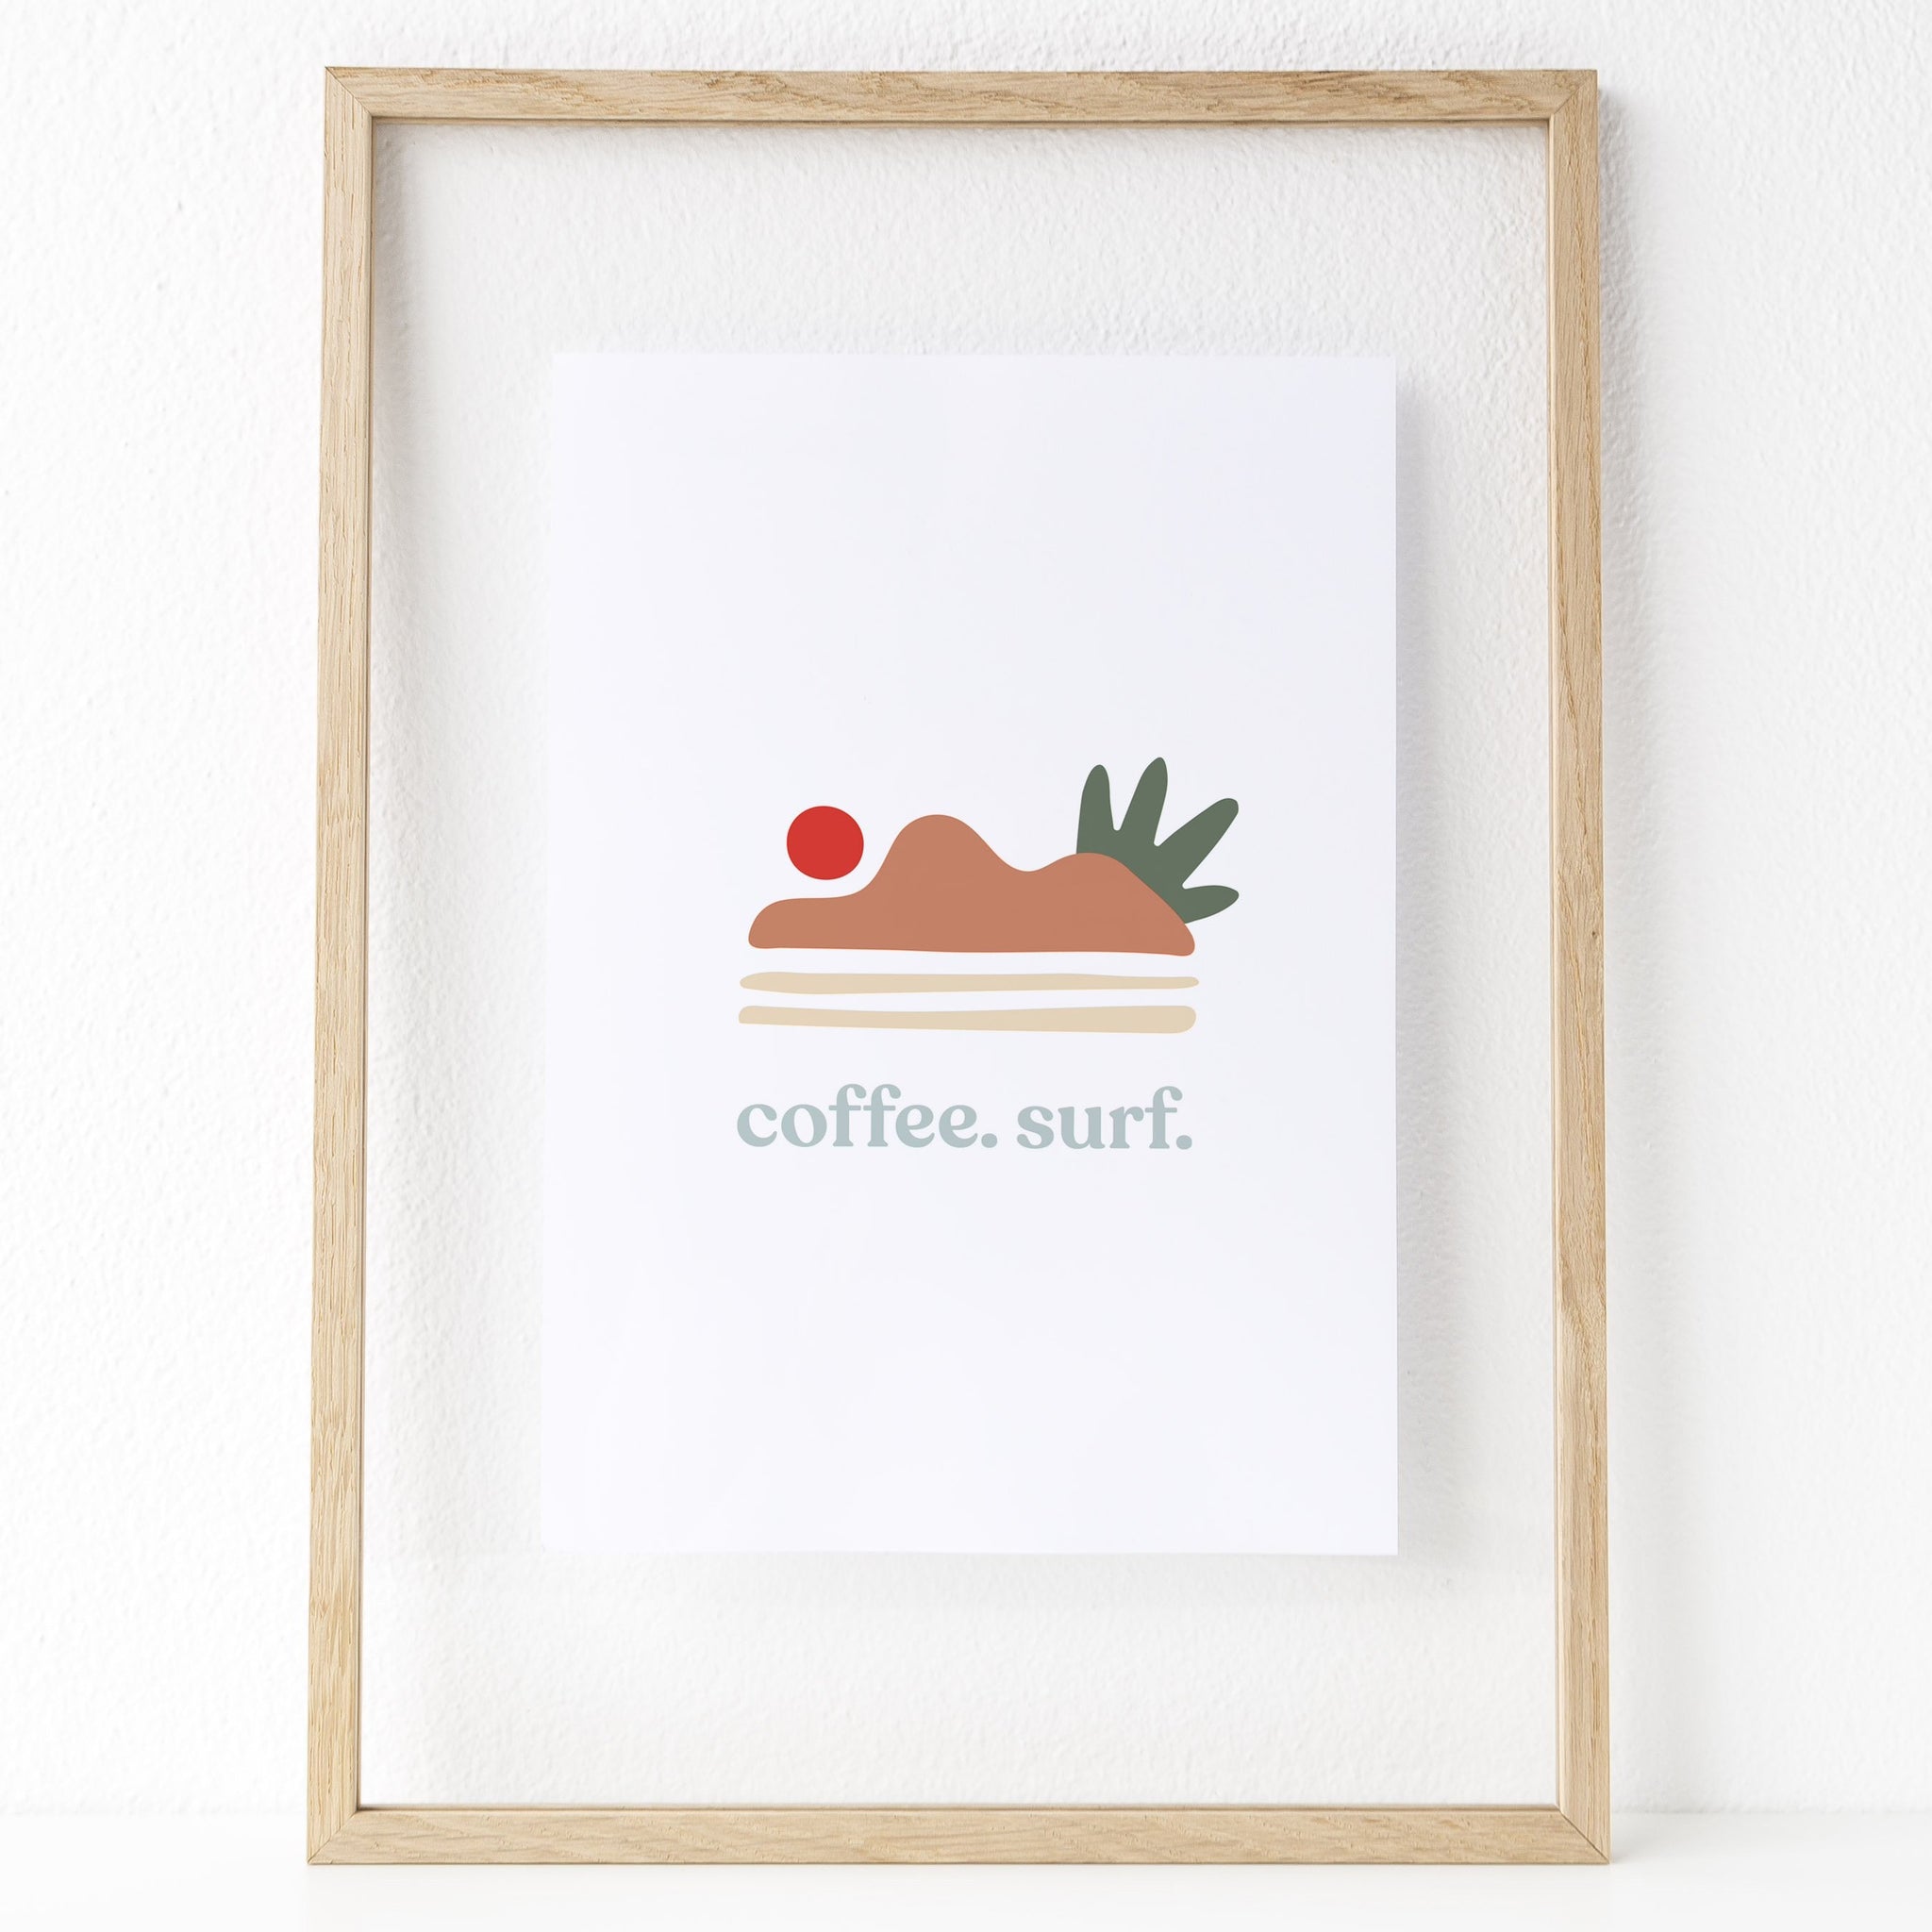 Coffee. Surf. Print. The print features some abstract shapes that resemble a sun setting over some hills. Hues of red, rust orange, dark forest green, and a neutral cream are featured in this print. 